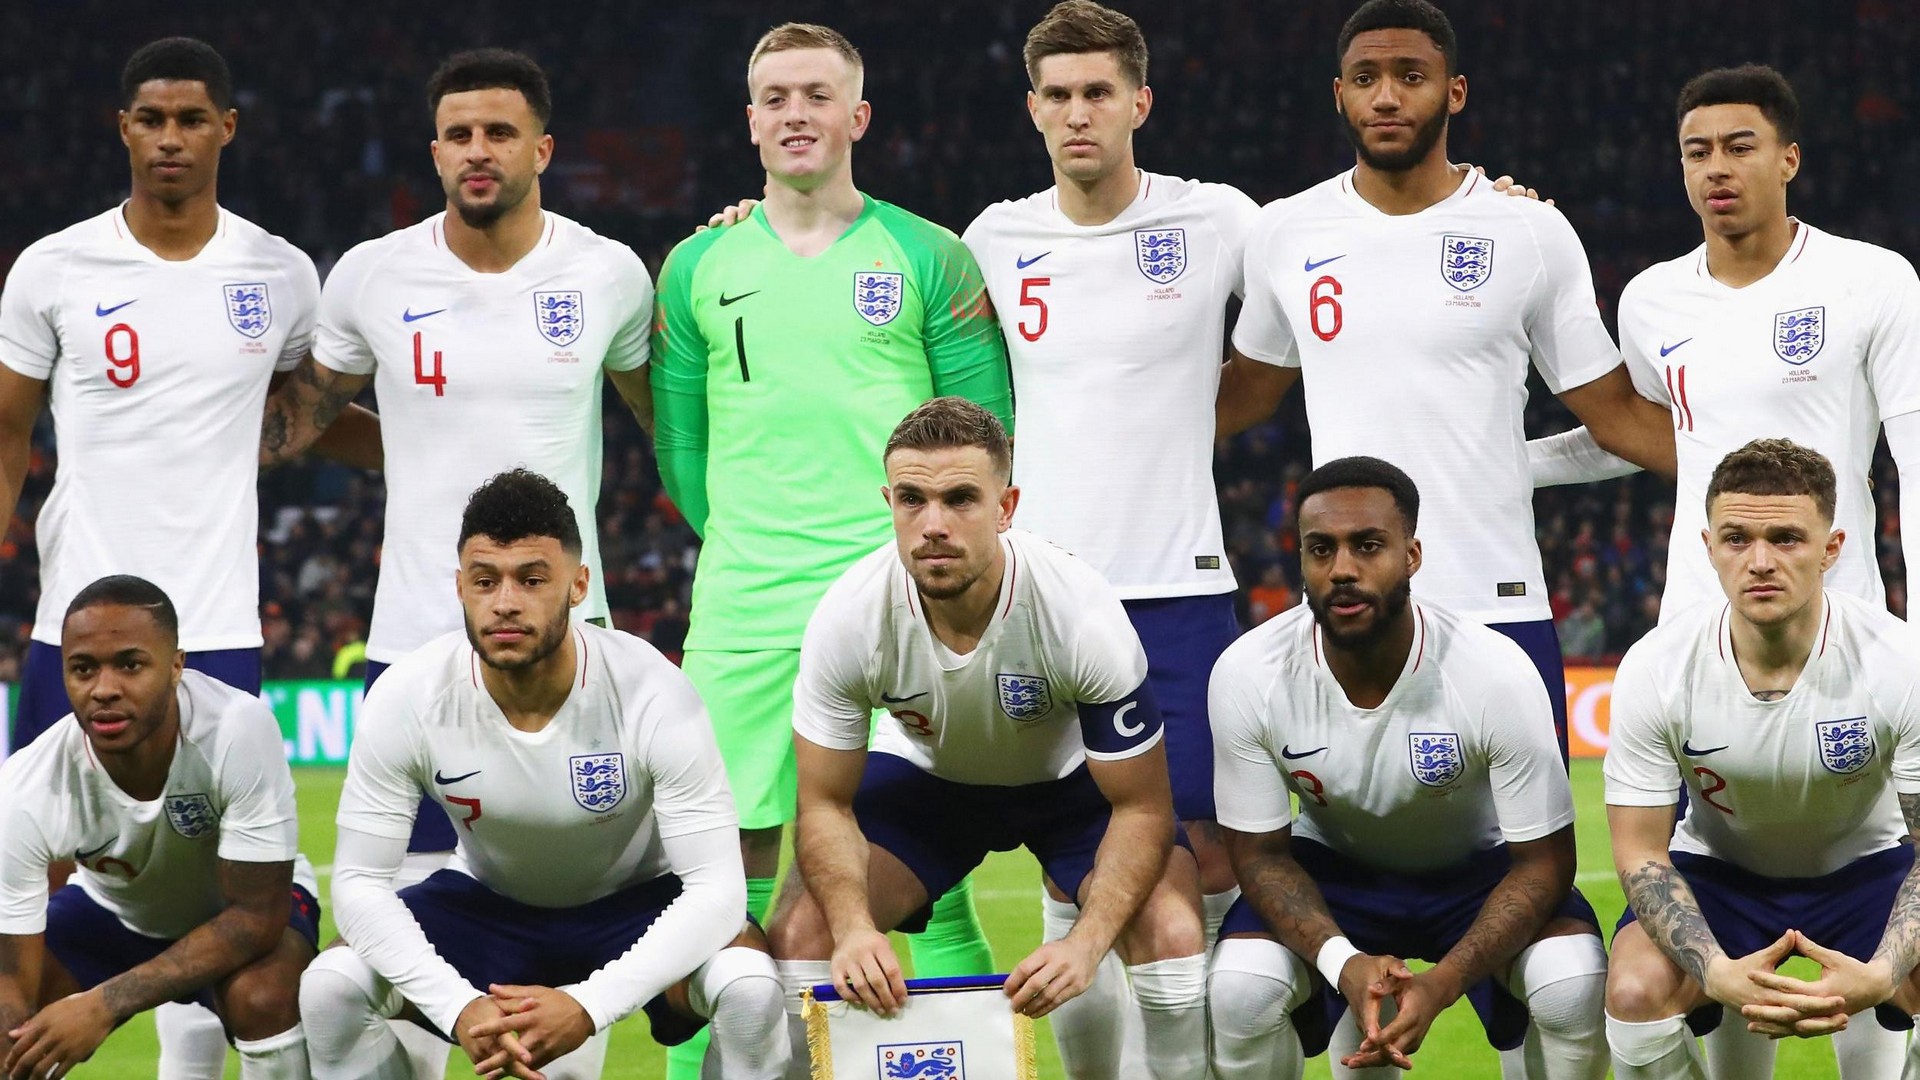 Wallpaper Desktop England National Team HD with resolution 1920x1080 pixel. You can make this wallpaper for your Mac or Windows Desktop Background, iPhone, Android or Tablet and another Smartphone device